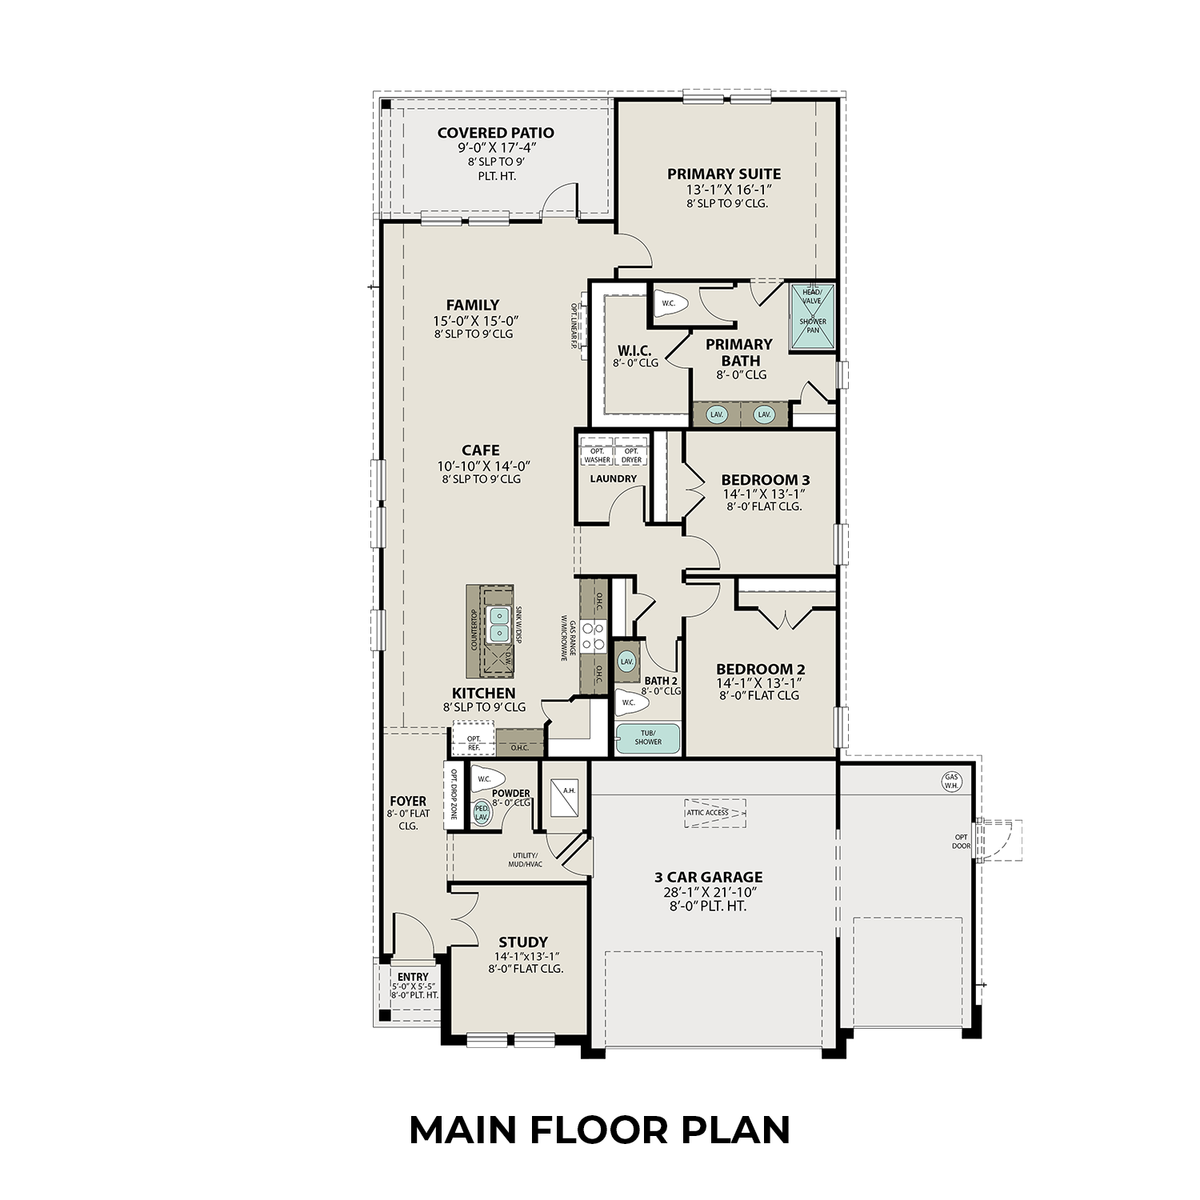 1 - The Riviera A with 3-Car Garage floor plan layout for 35 Wichita Trail in Davidson Homes' River Ranch Meadows community.